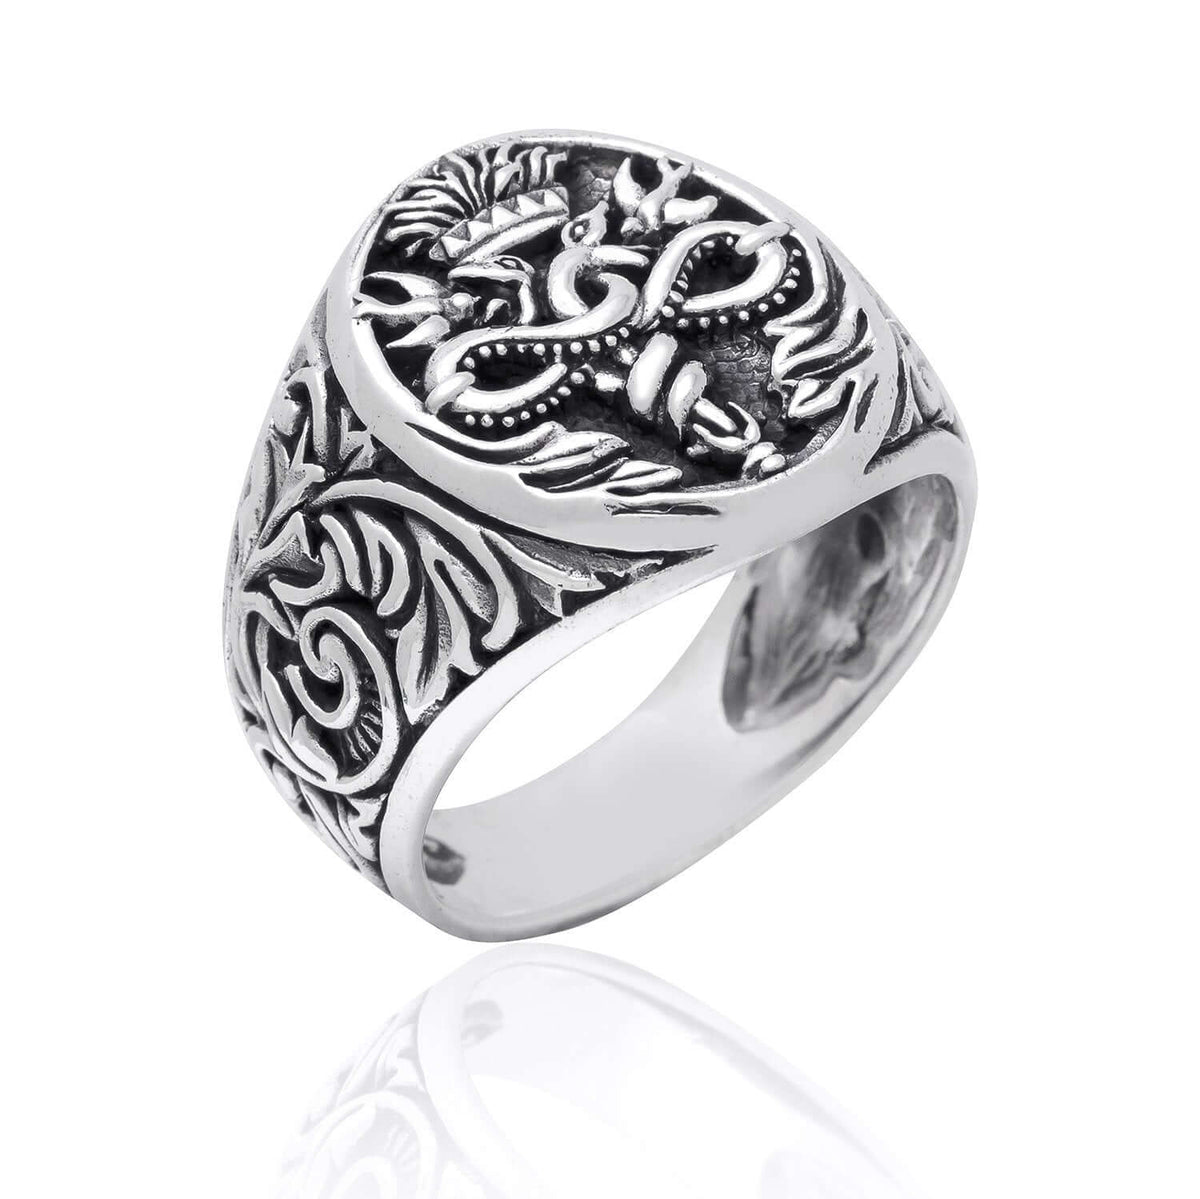 925 Sterling Silver Caduceus Medical Symbol Signet Ring - SilverMania925